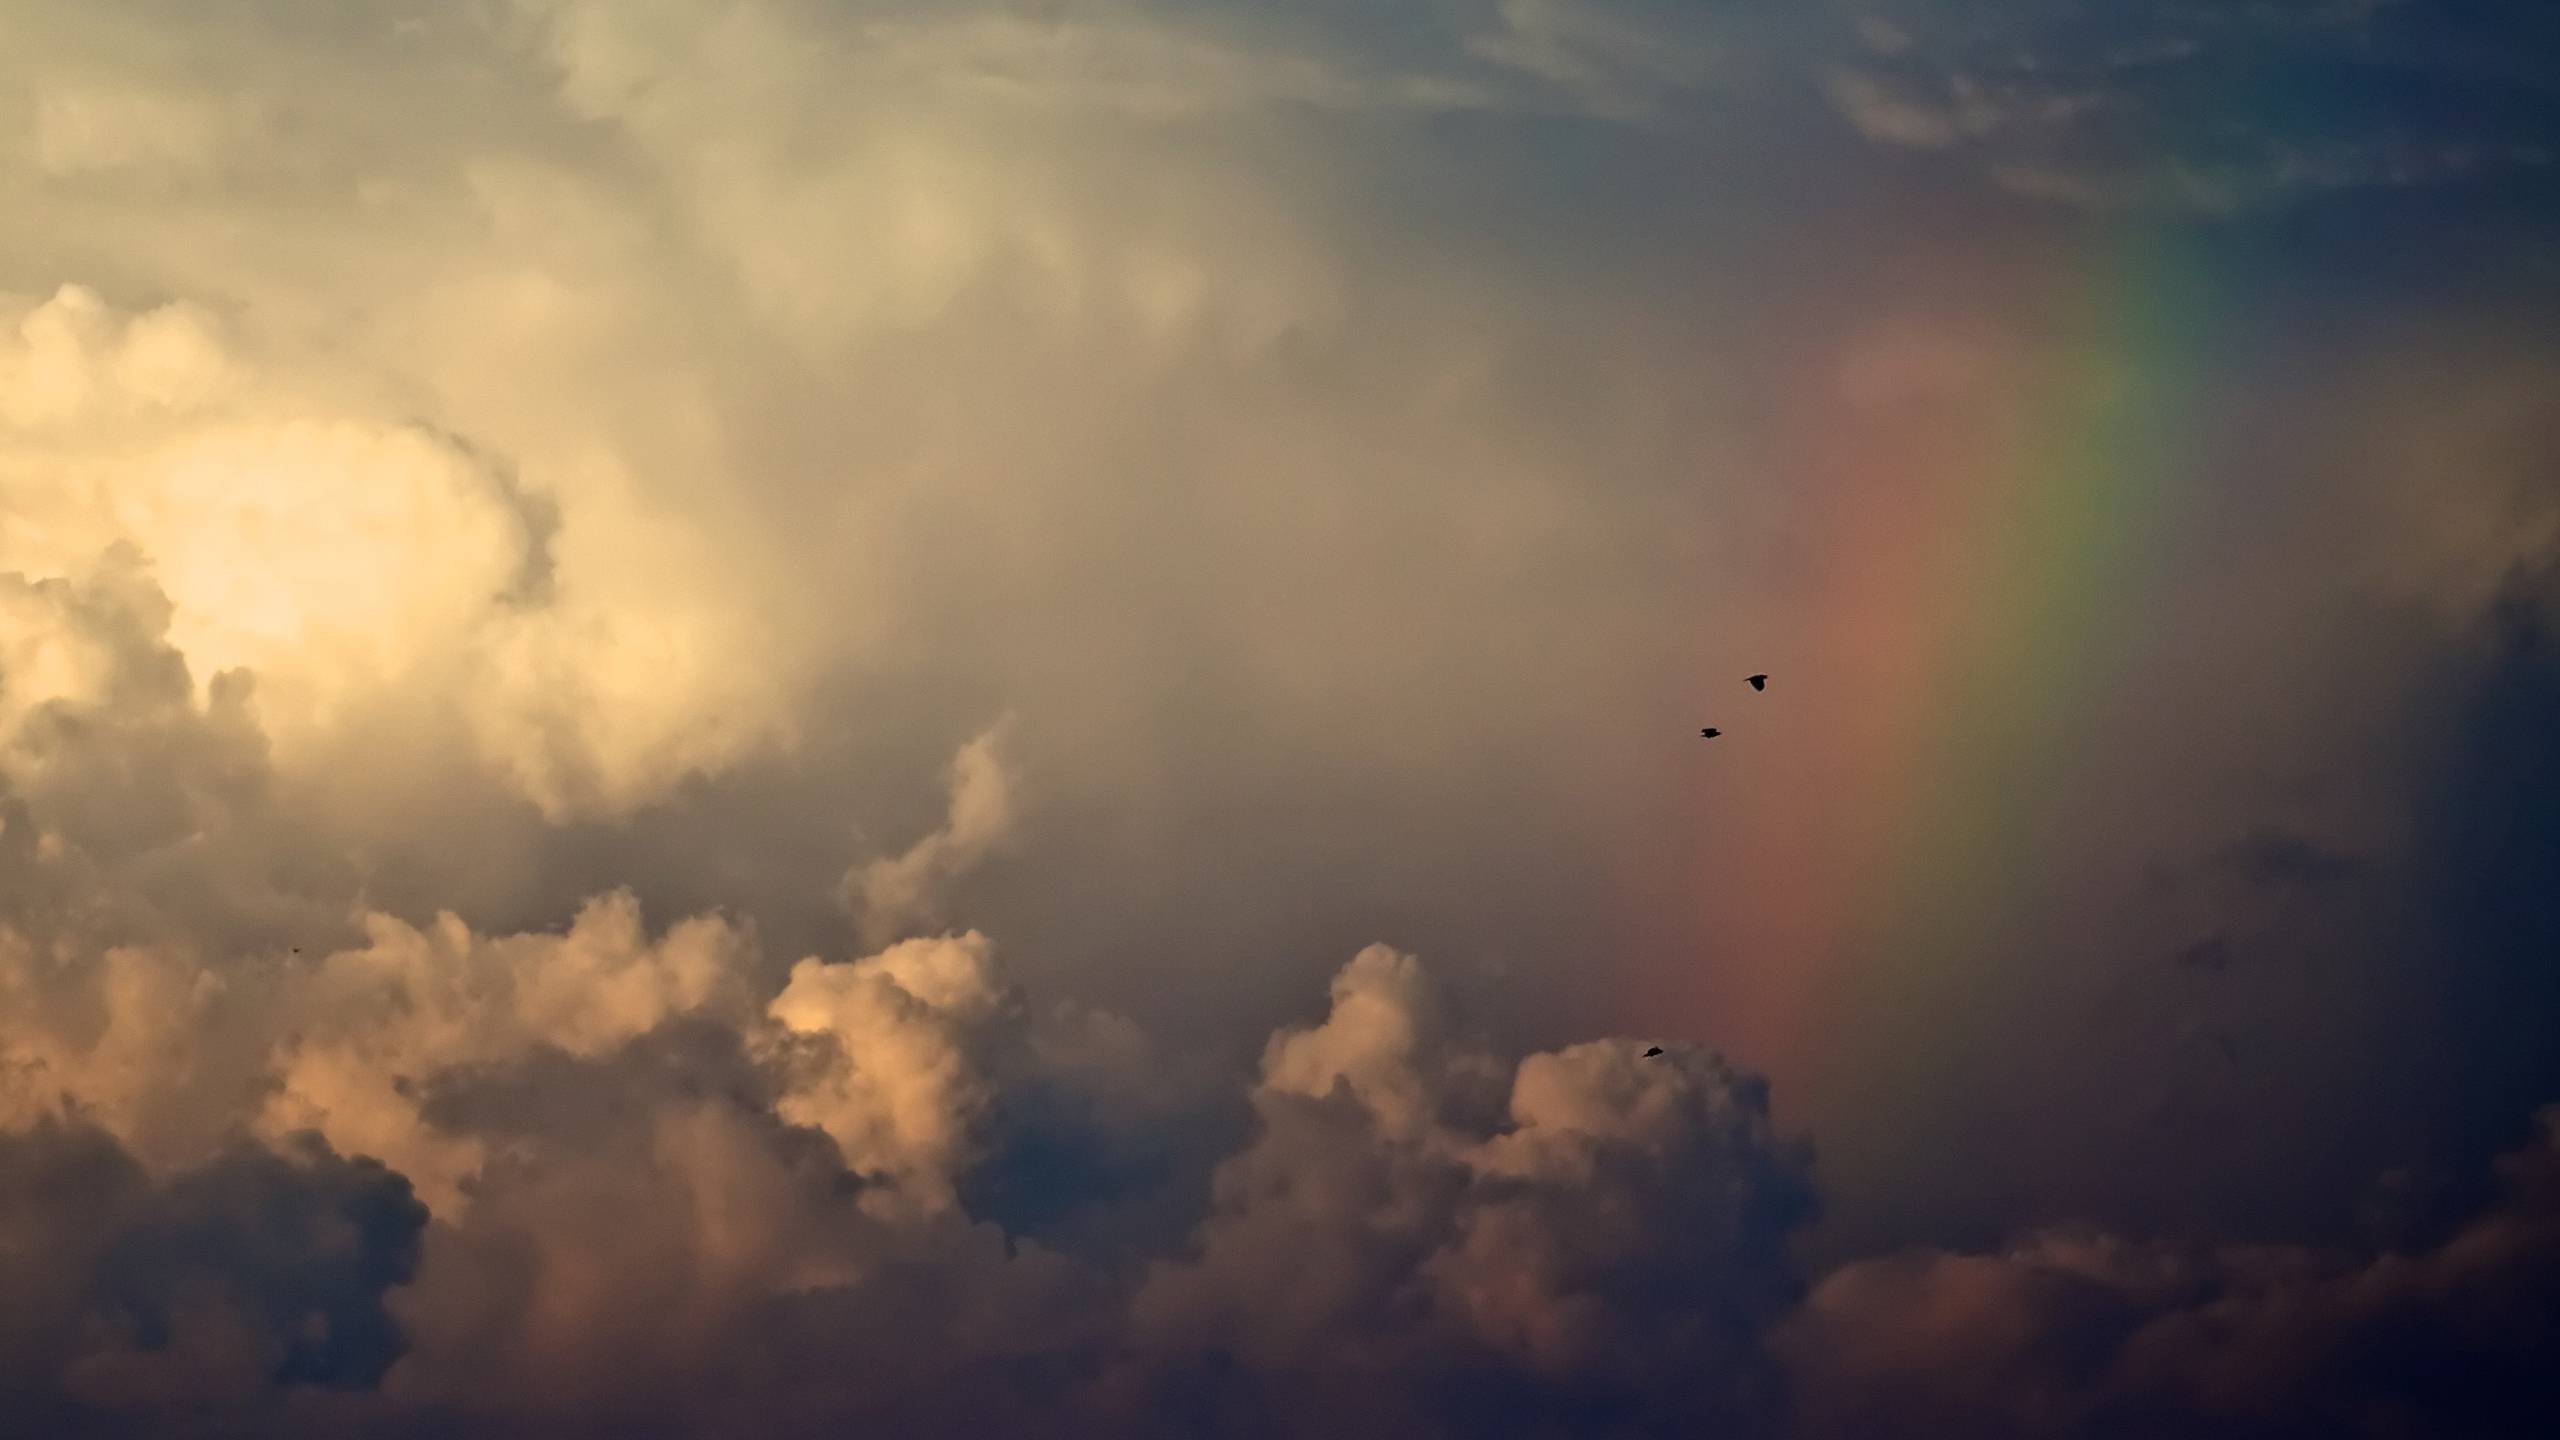 2560x1440 Storm Clouds And Rainbow iMac Wallpaper | HD Wallpapers Source